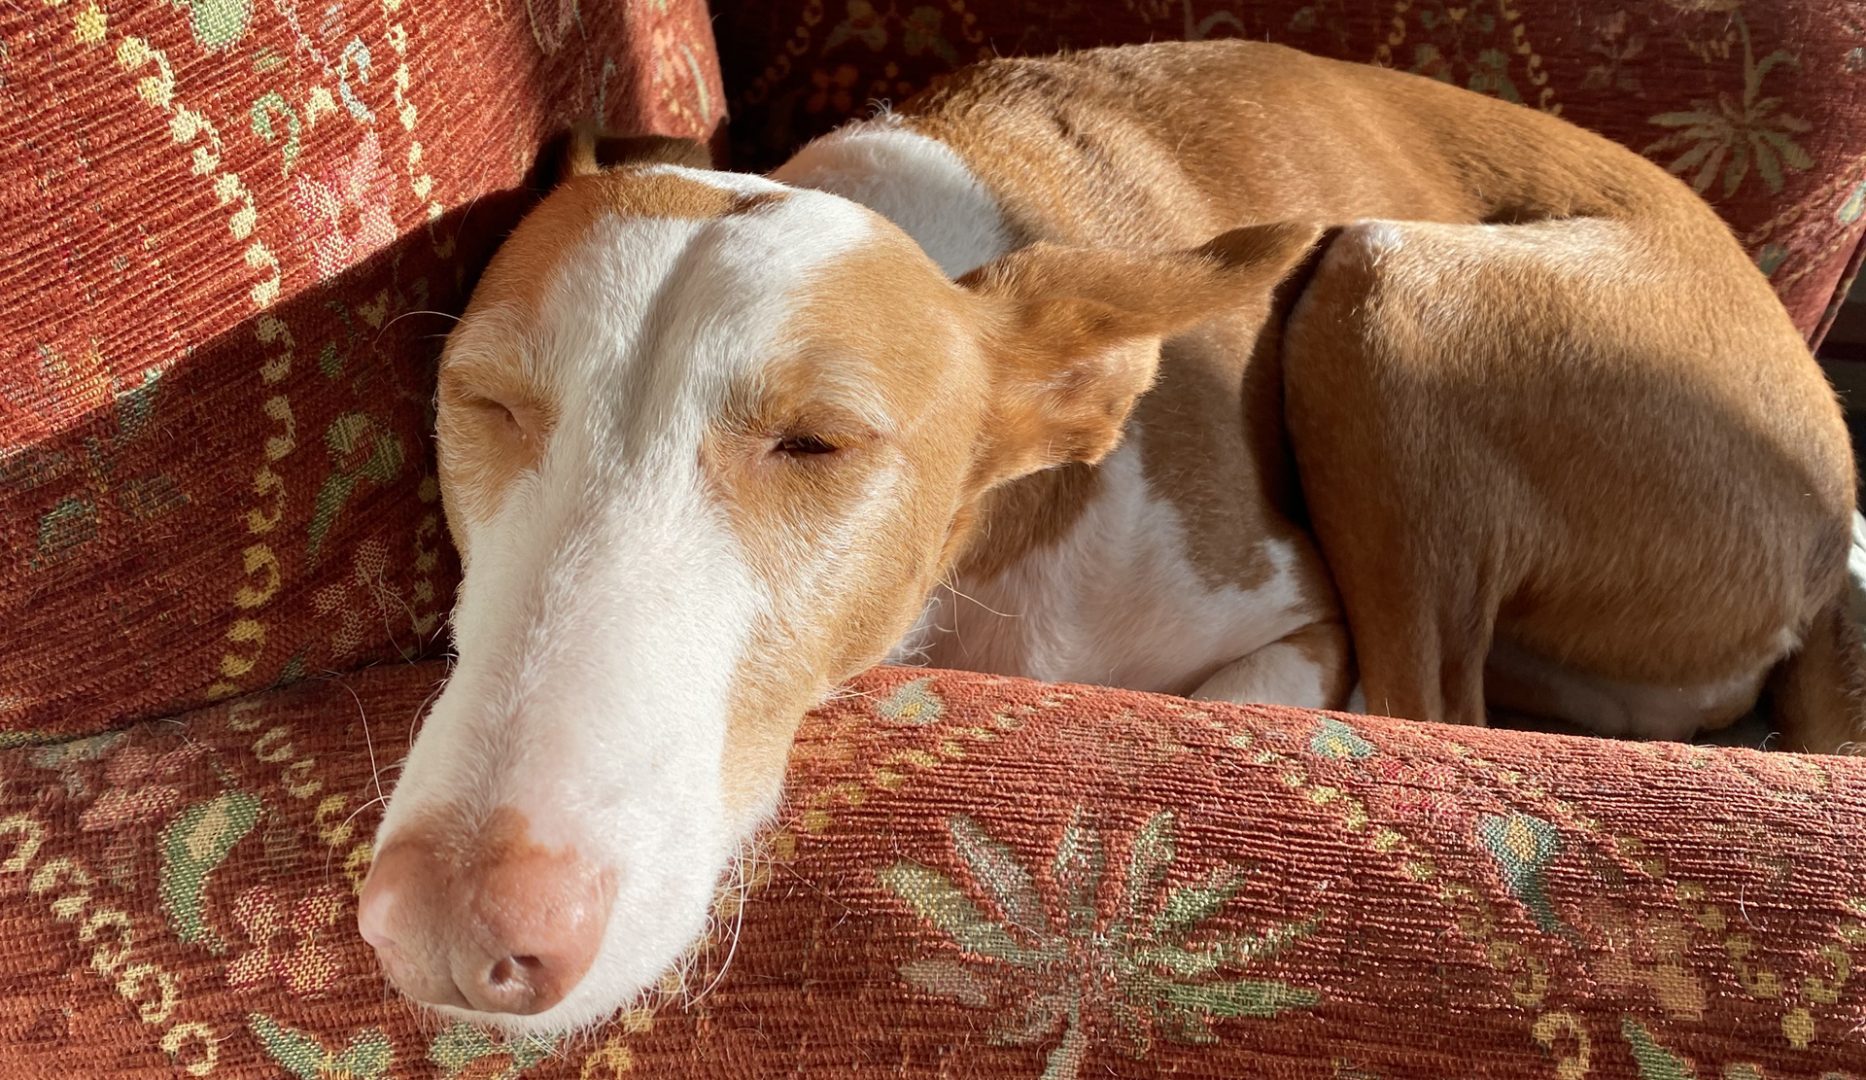 A podenco dog relaxing in florries bunkhouse